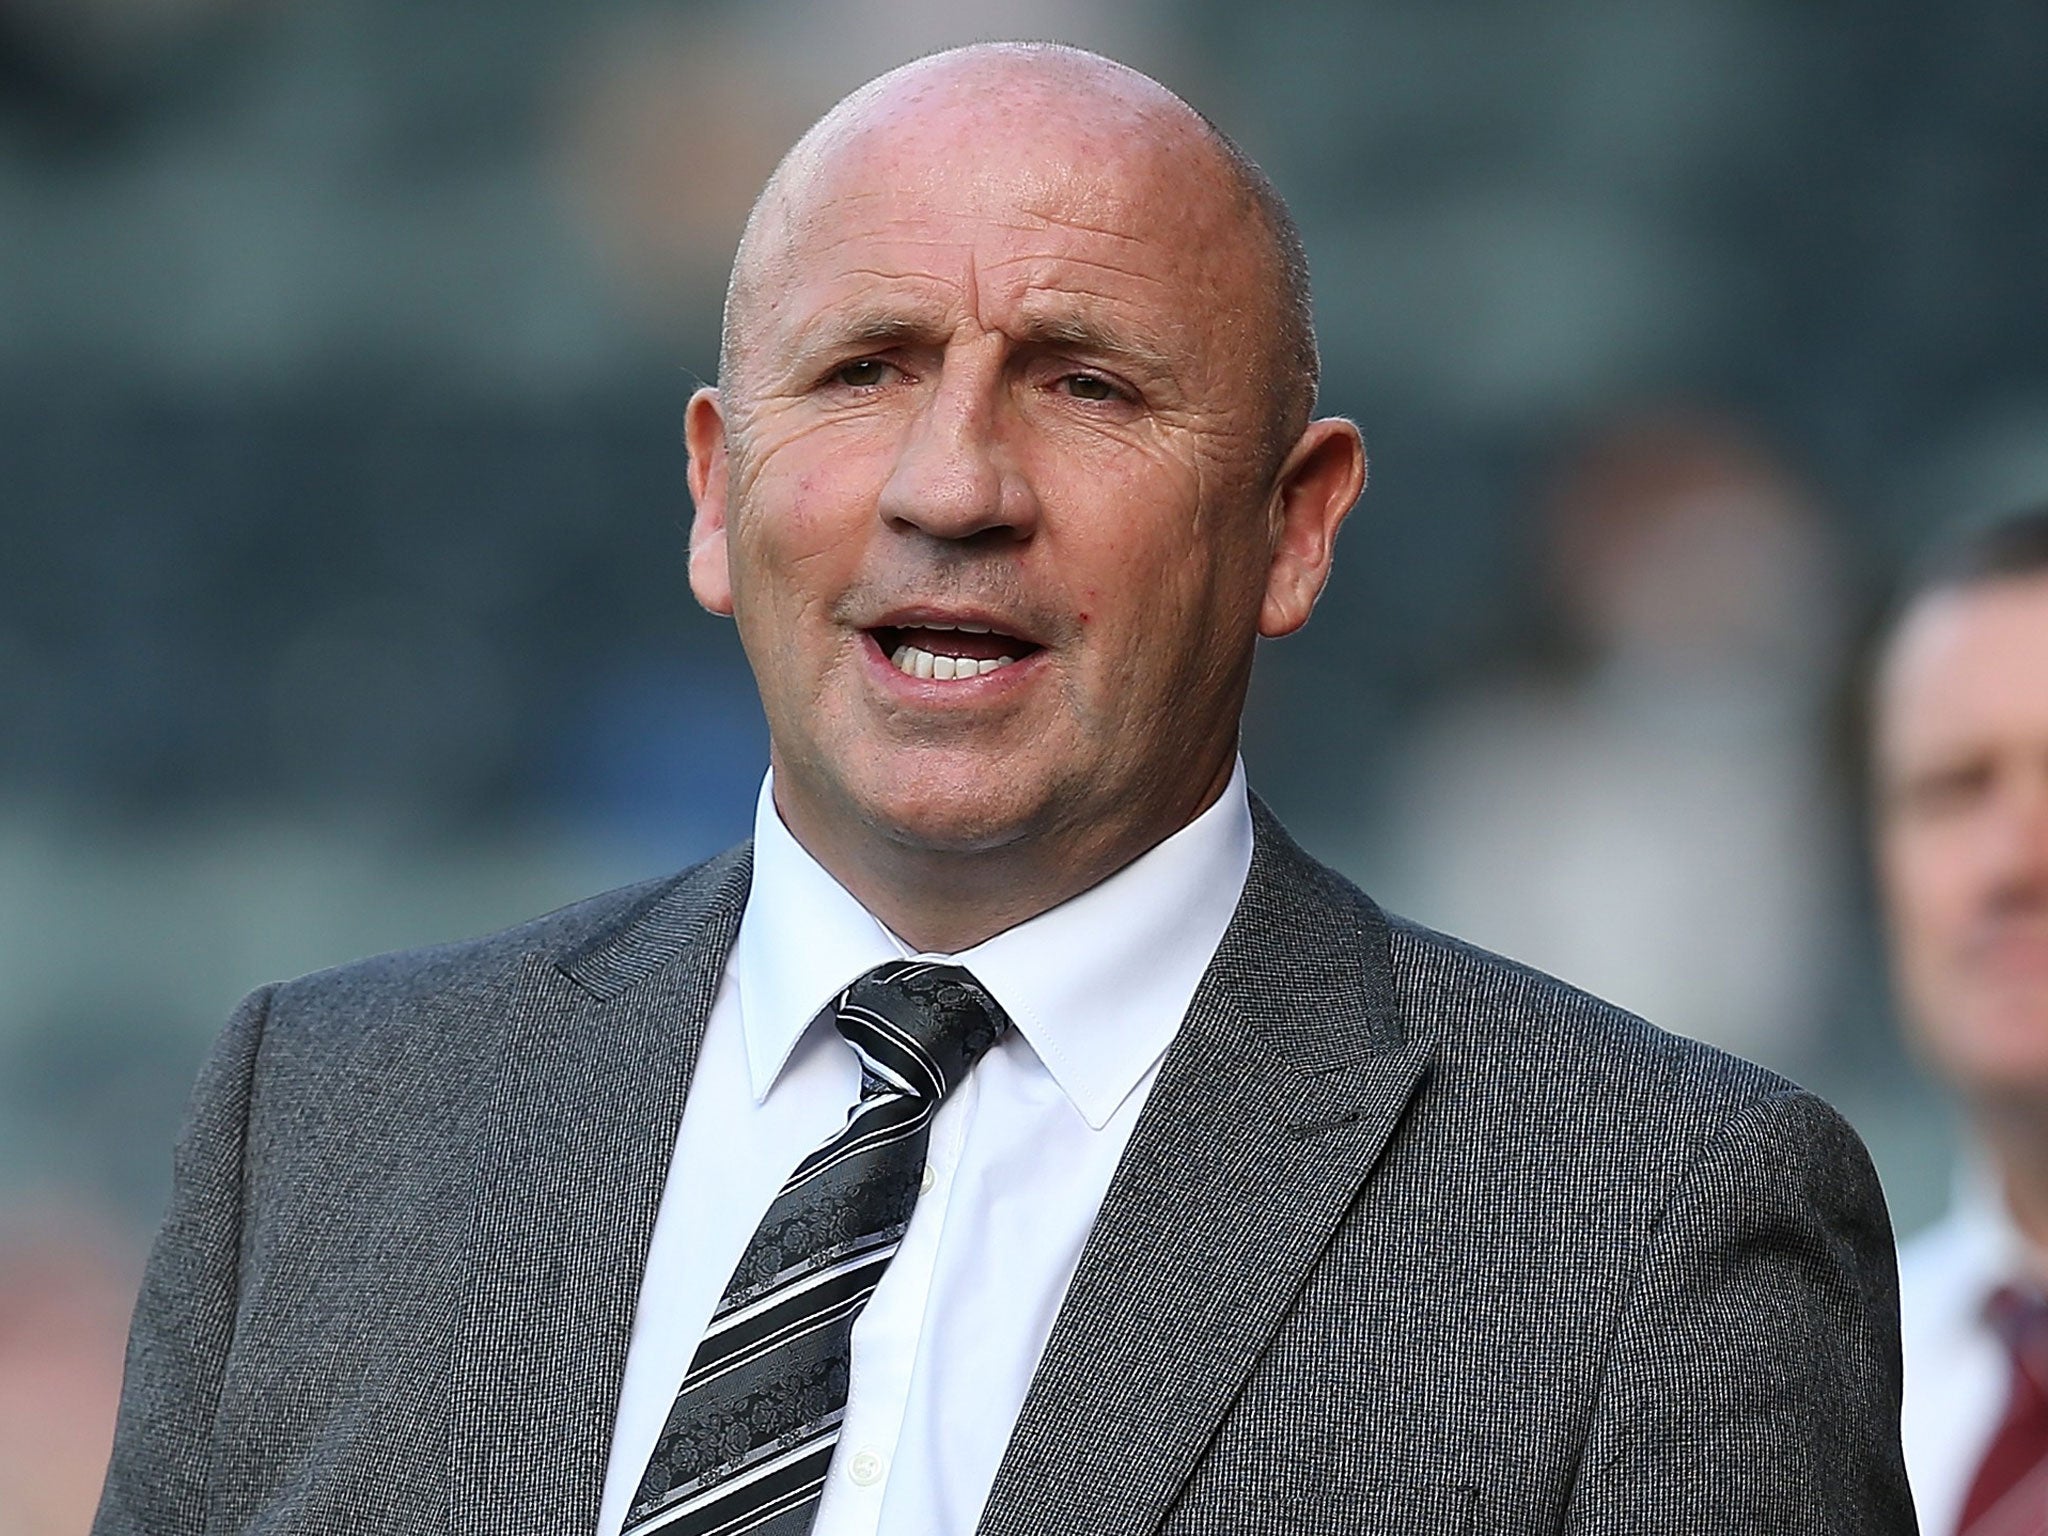 John Coleman, the Rochdale manager, has an innovative way to deal with disgruntled fans